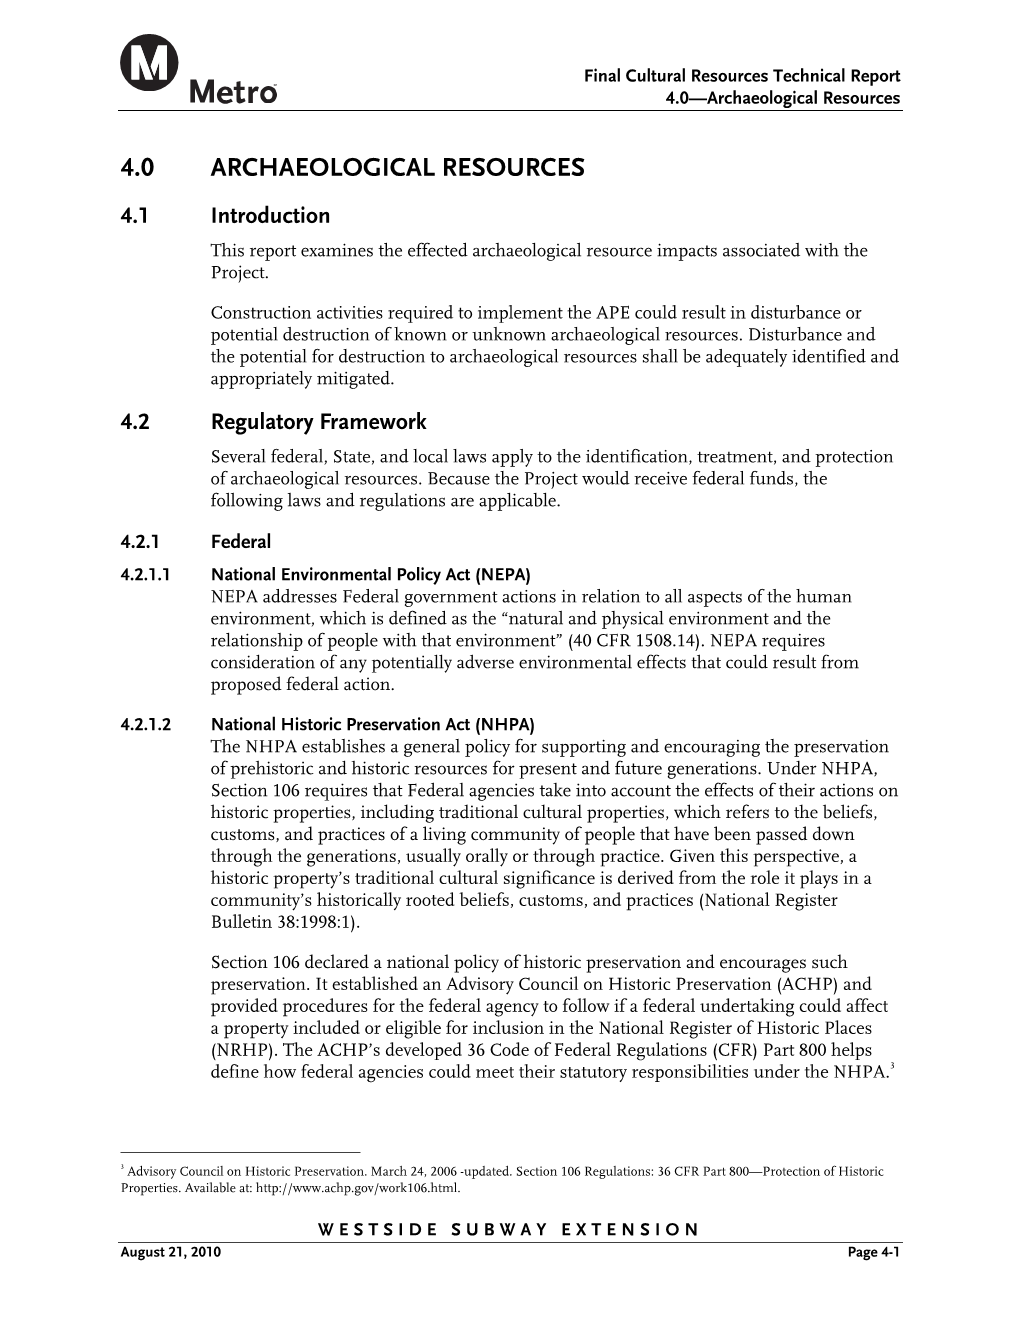 4.0 ARCHAEOLOGICAL RESOURCES 4.1 Introduction This Report Examines the Effected Archaeological Resource Impacts Associated with the Project